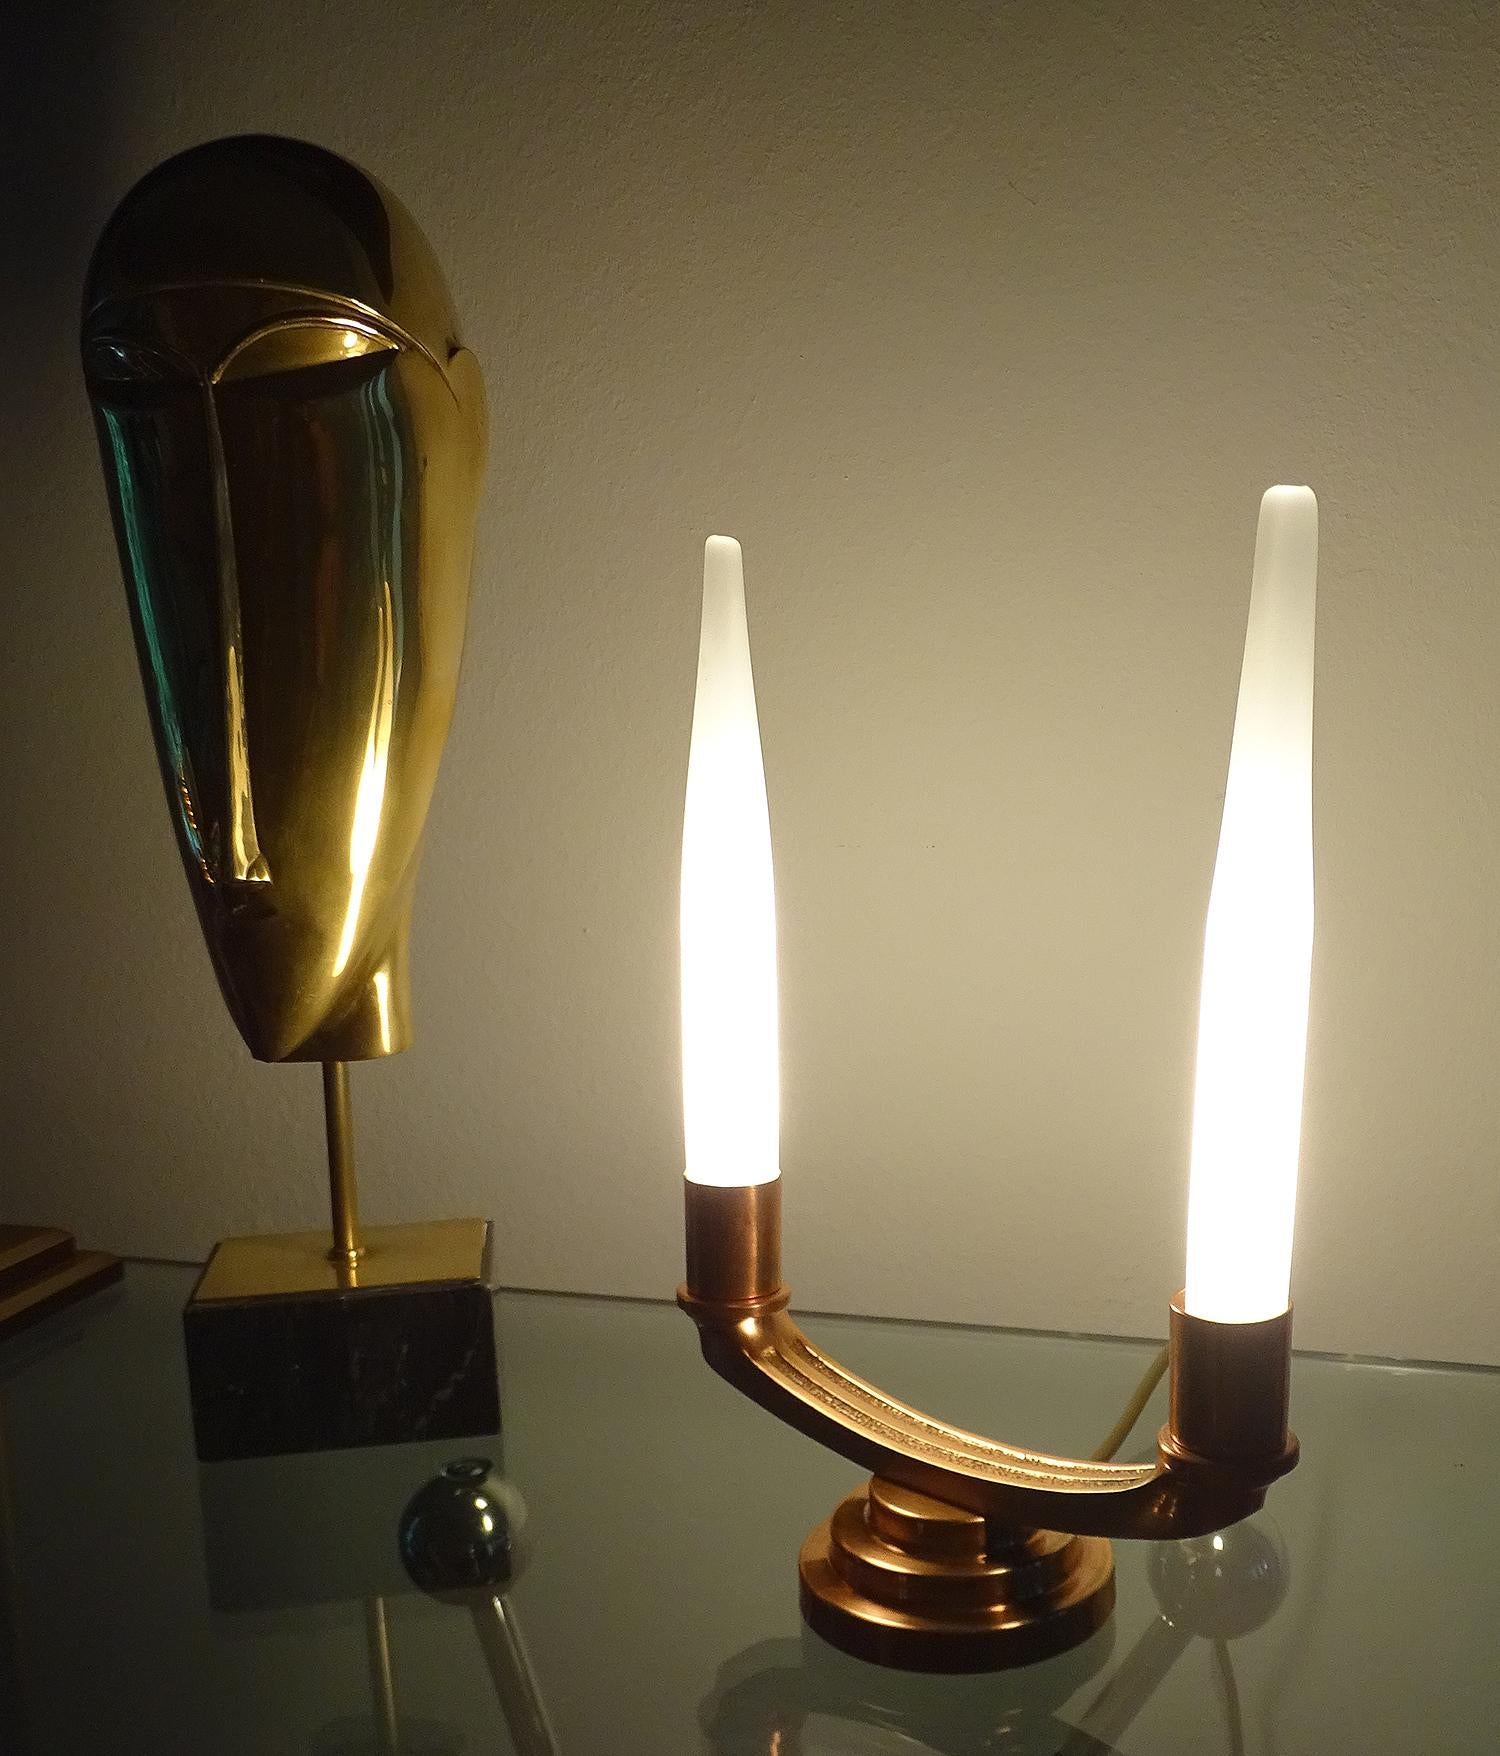 Pair of French Art Deco Modernist Uplighter  Lamps, Brass Copper Glass  Lights For Sale 2